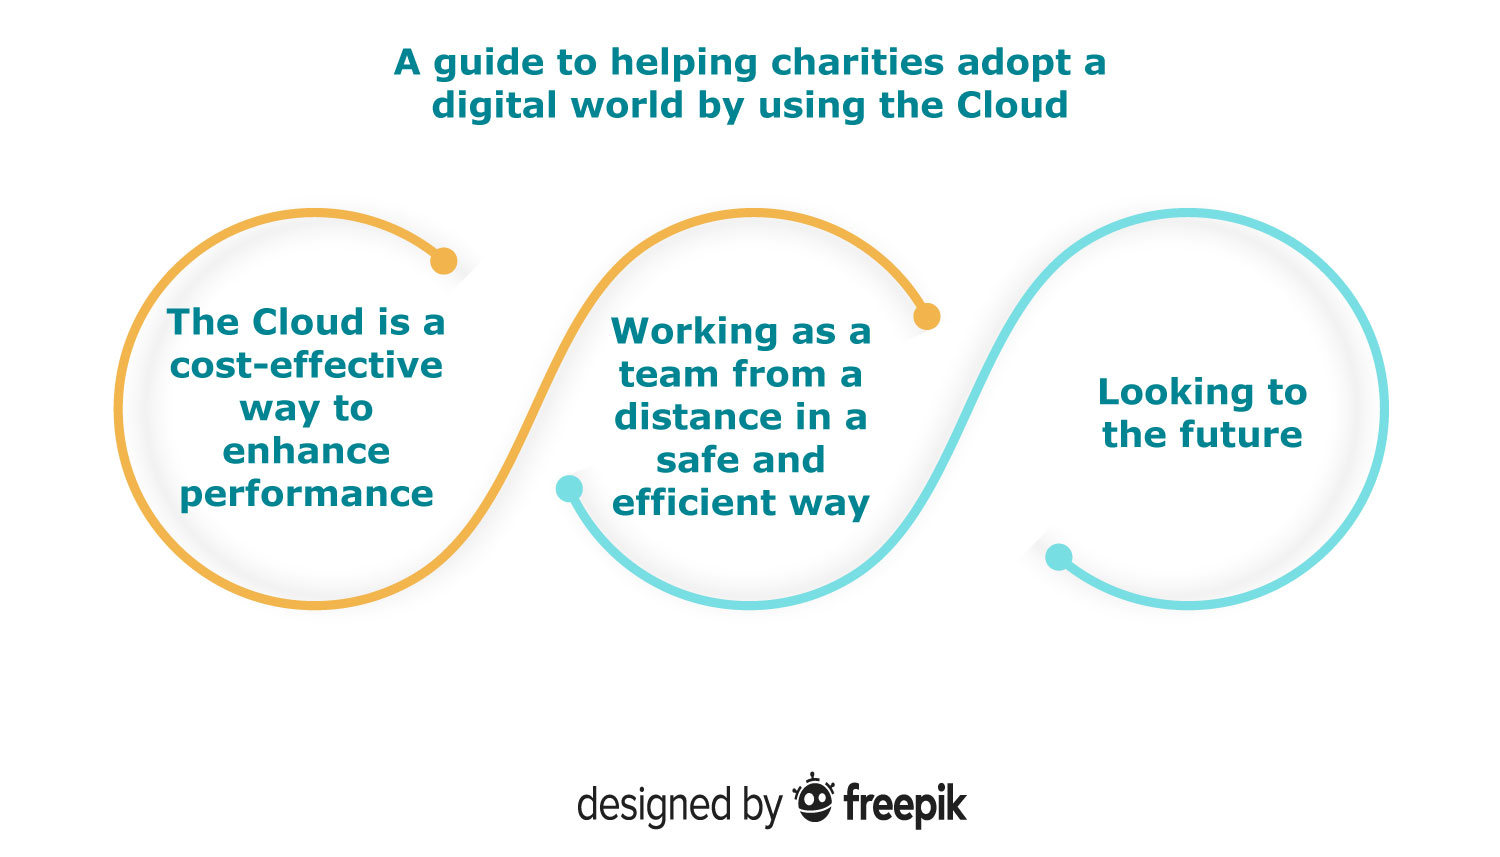 A guide to helping charities adopt a digital world by using the Cloud